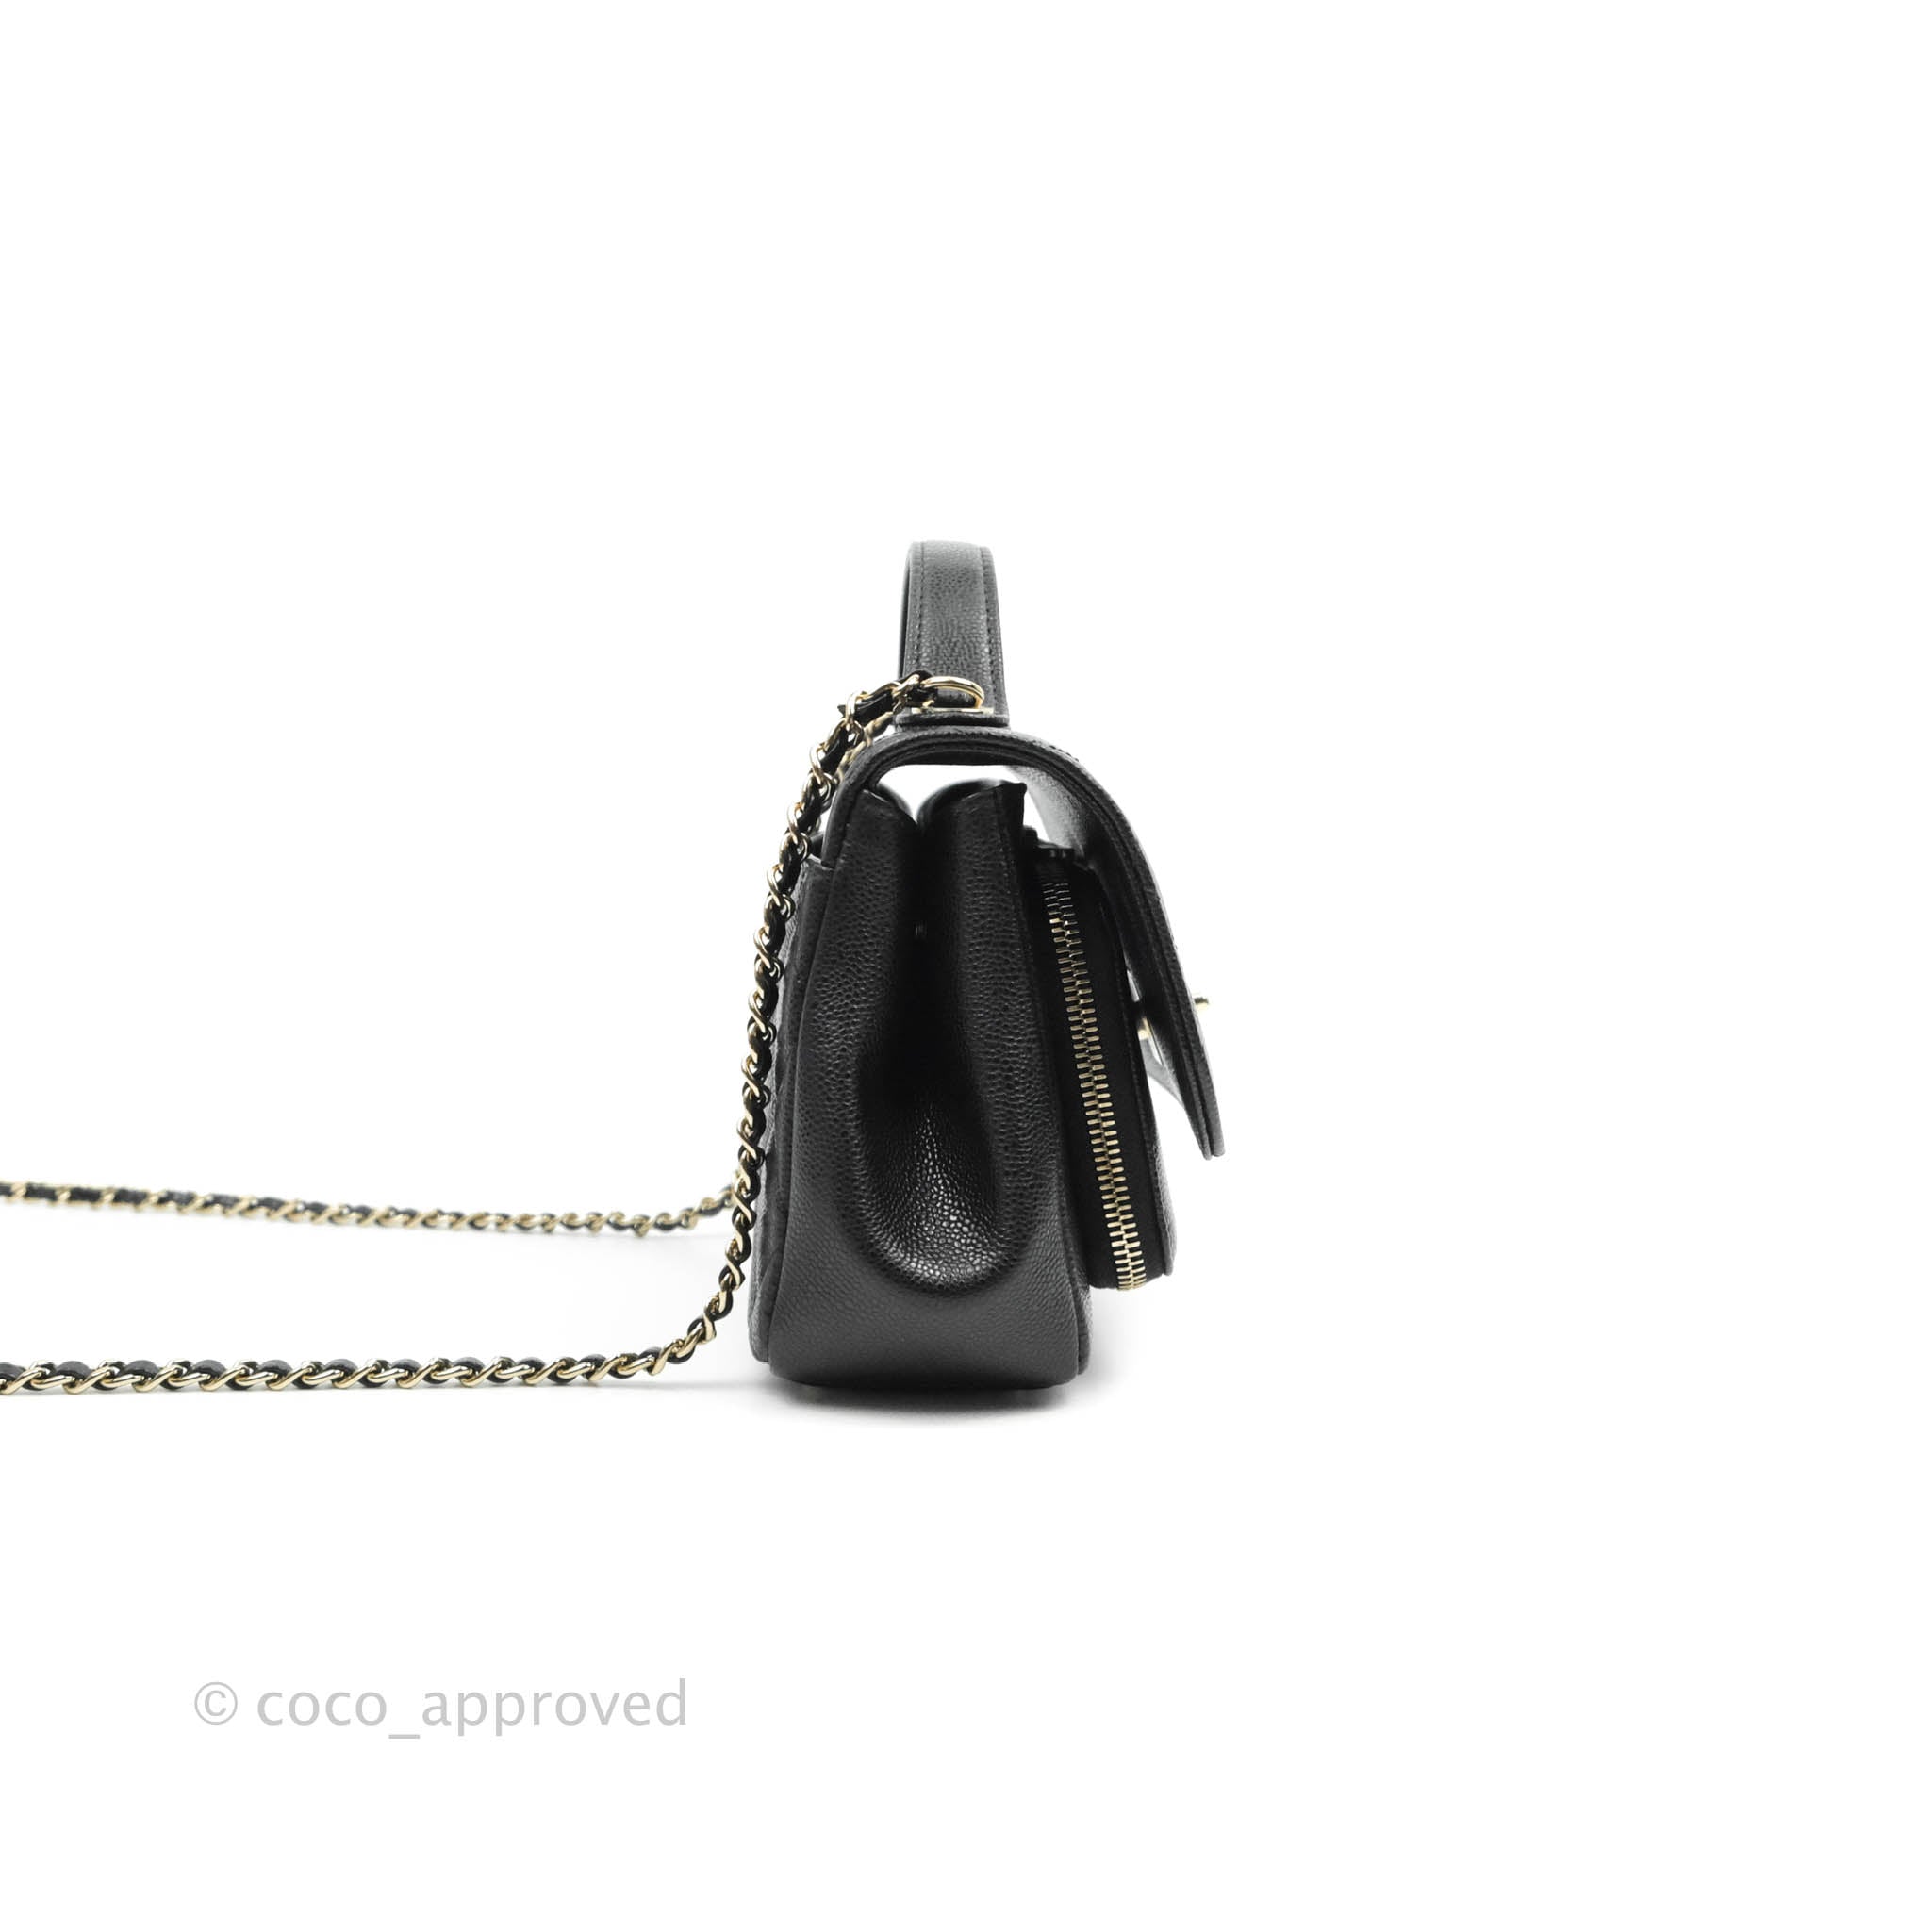 NEW CHANEL COCO HANDLE VS. BUSINESS AFFINITY IN MINI SIZE